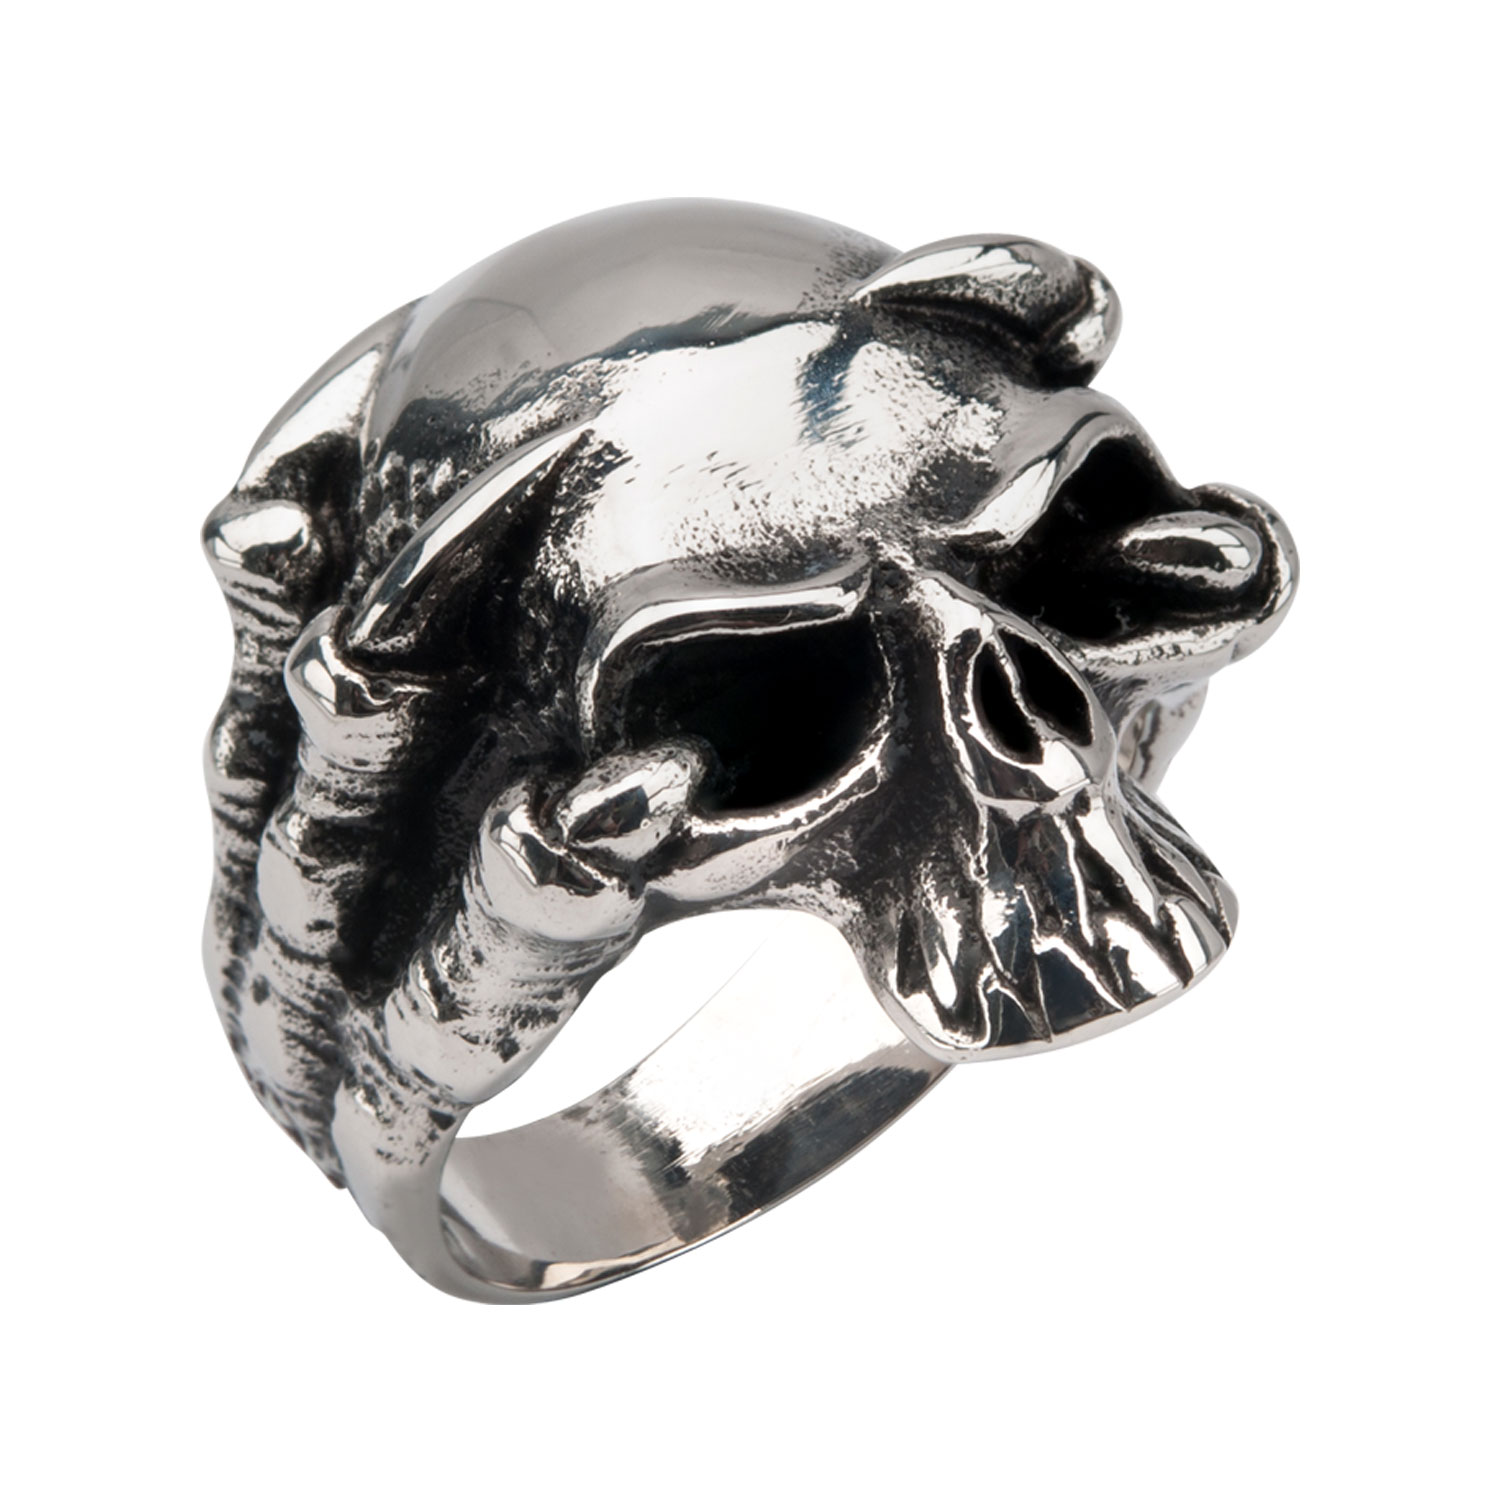 Black Oxidized Skull Ring with Claws Lee Ann's Fine Jewelry Russellville, AR